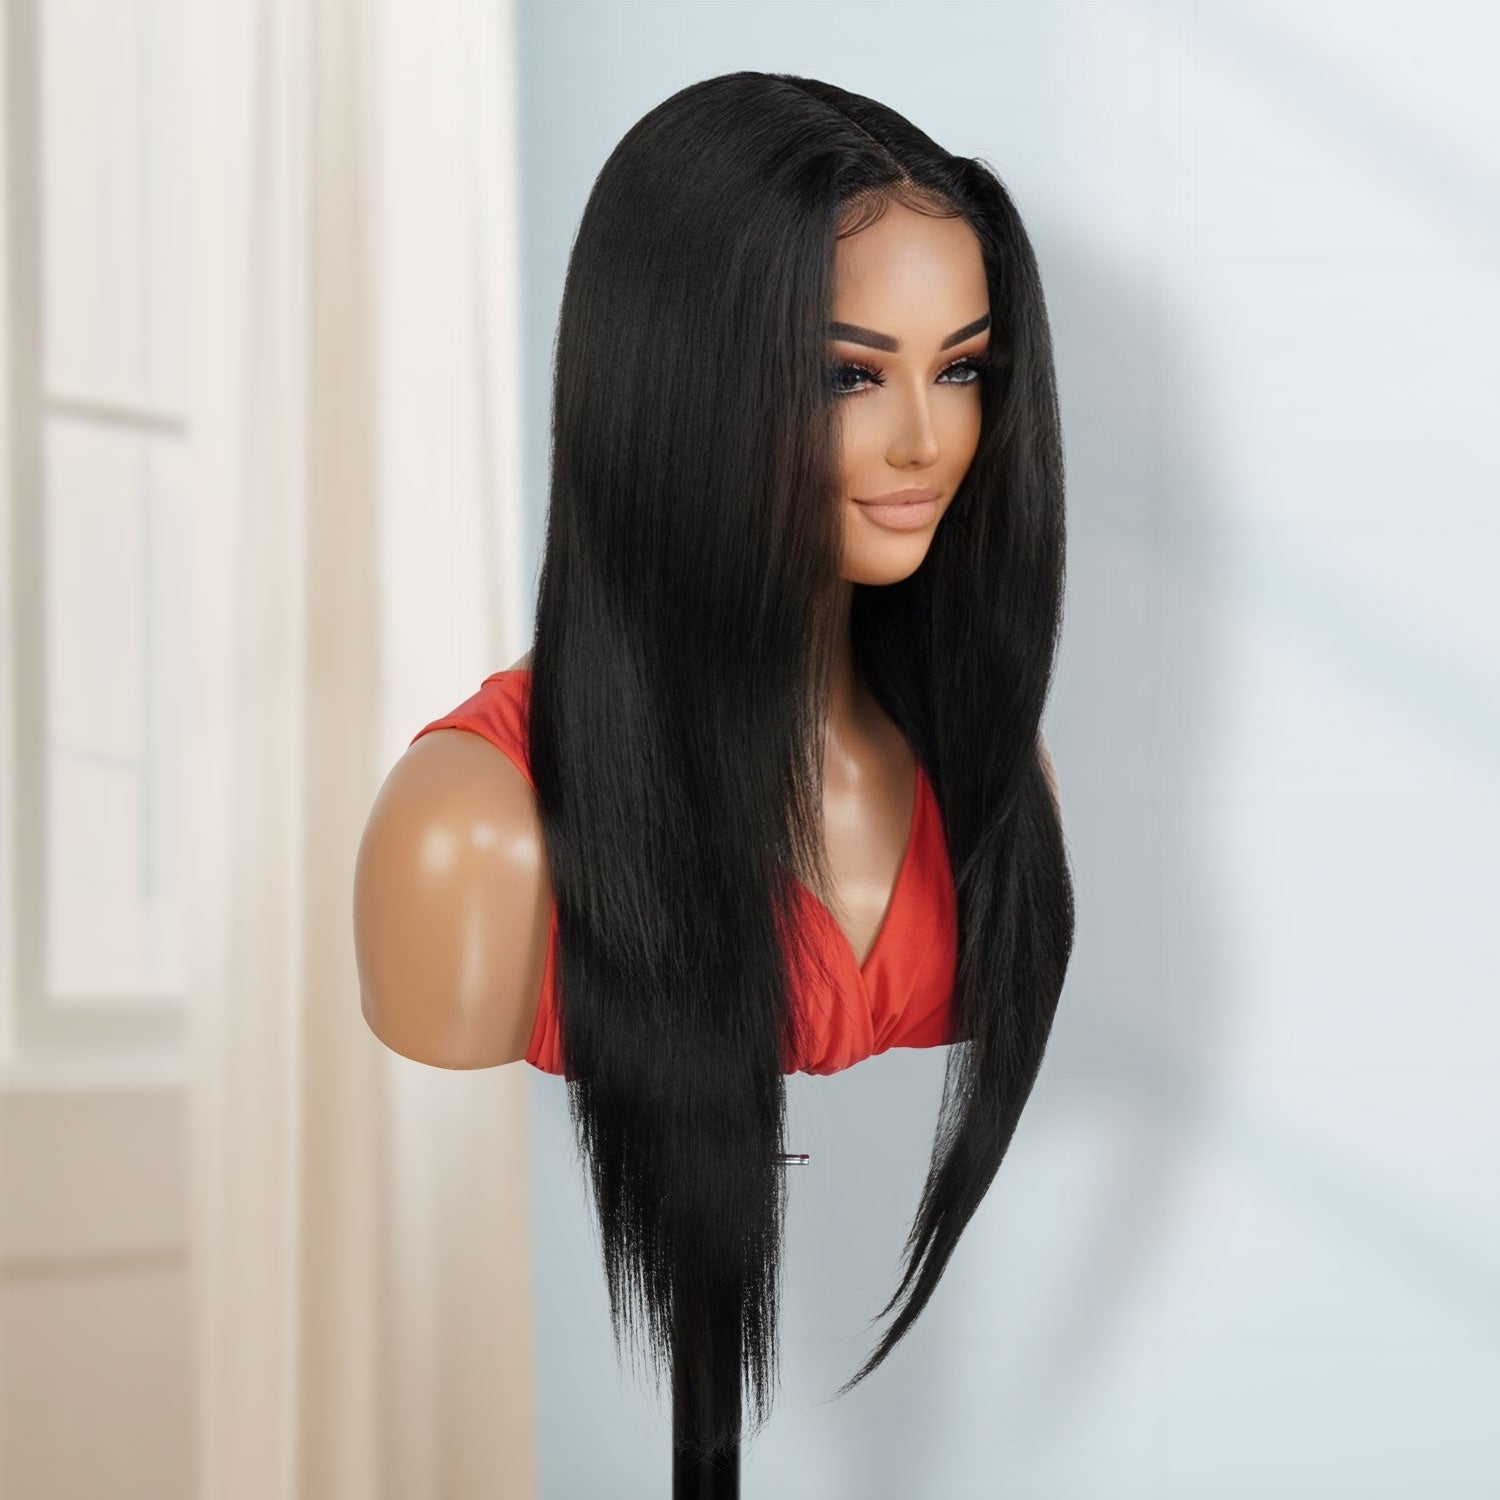 Introducing our stylish 26-inch waist-length straight lace front wig! Crafted with premium synthetic fibers, this wig guarantees a sleek and sophisticated appearance for any event. Its lace front design creates a natural hairline, and adjustable straps provide a secure and comfortable fit. Elevate your style or enhance your natural beauty with this essential wig. Shop now for the ultimate in style and versatility.